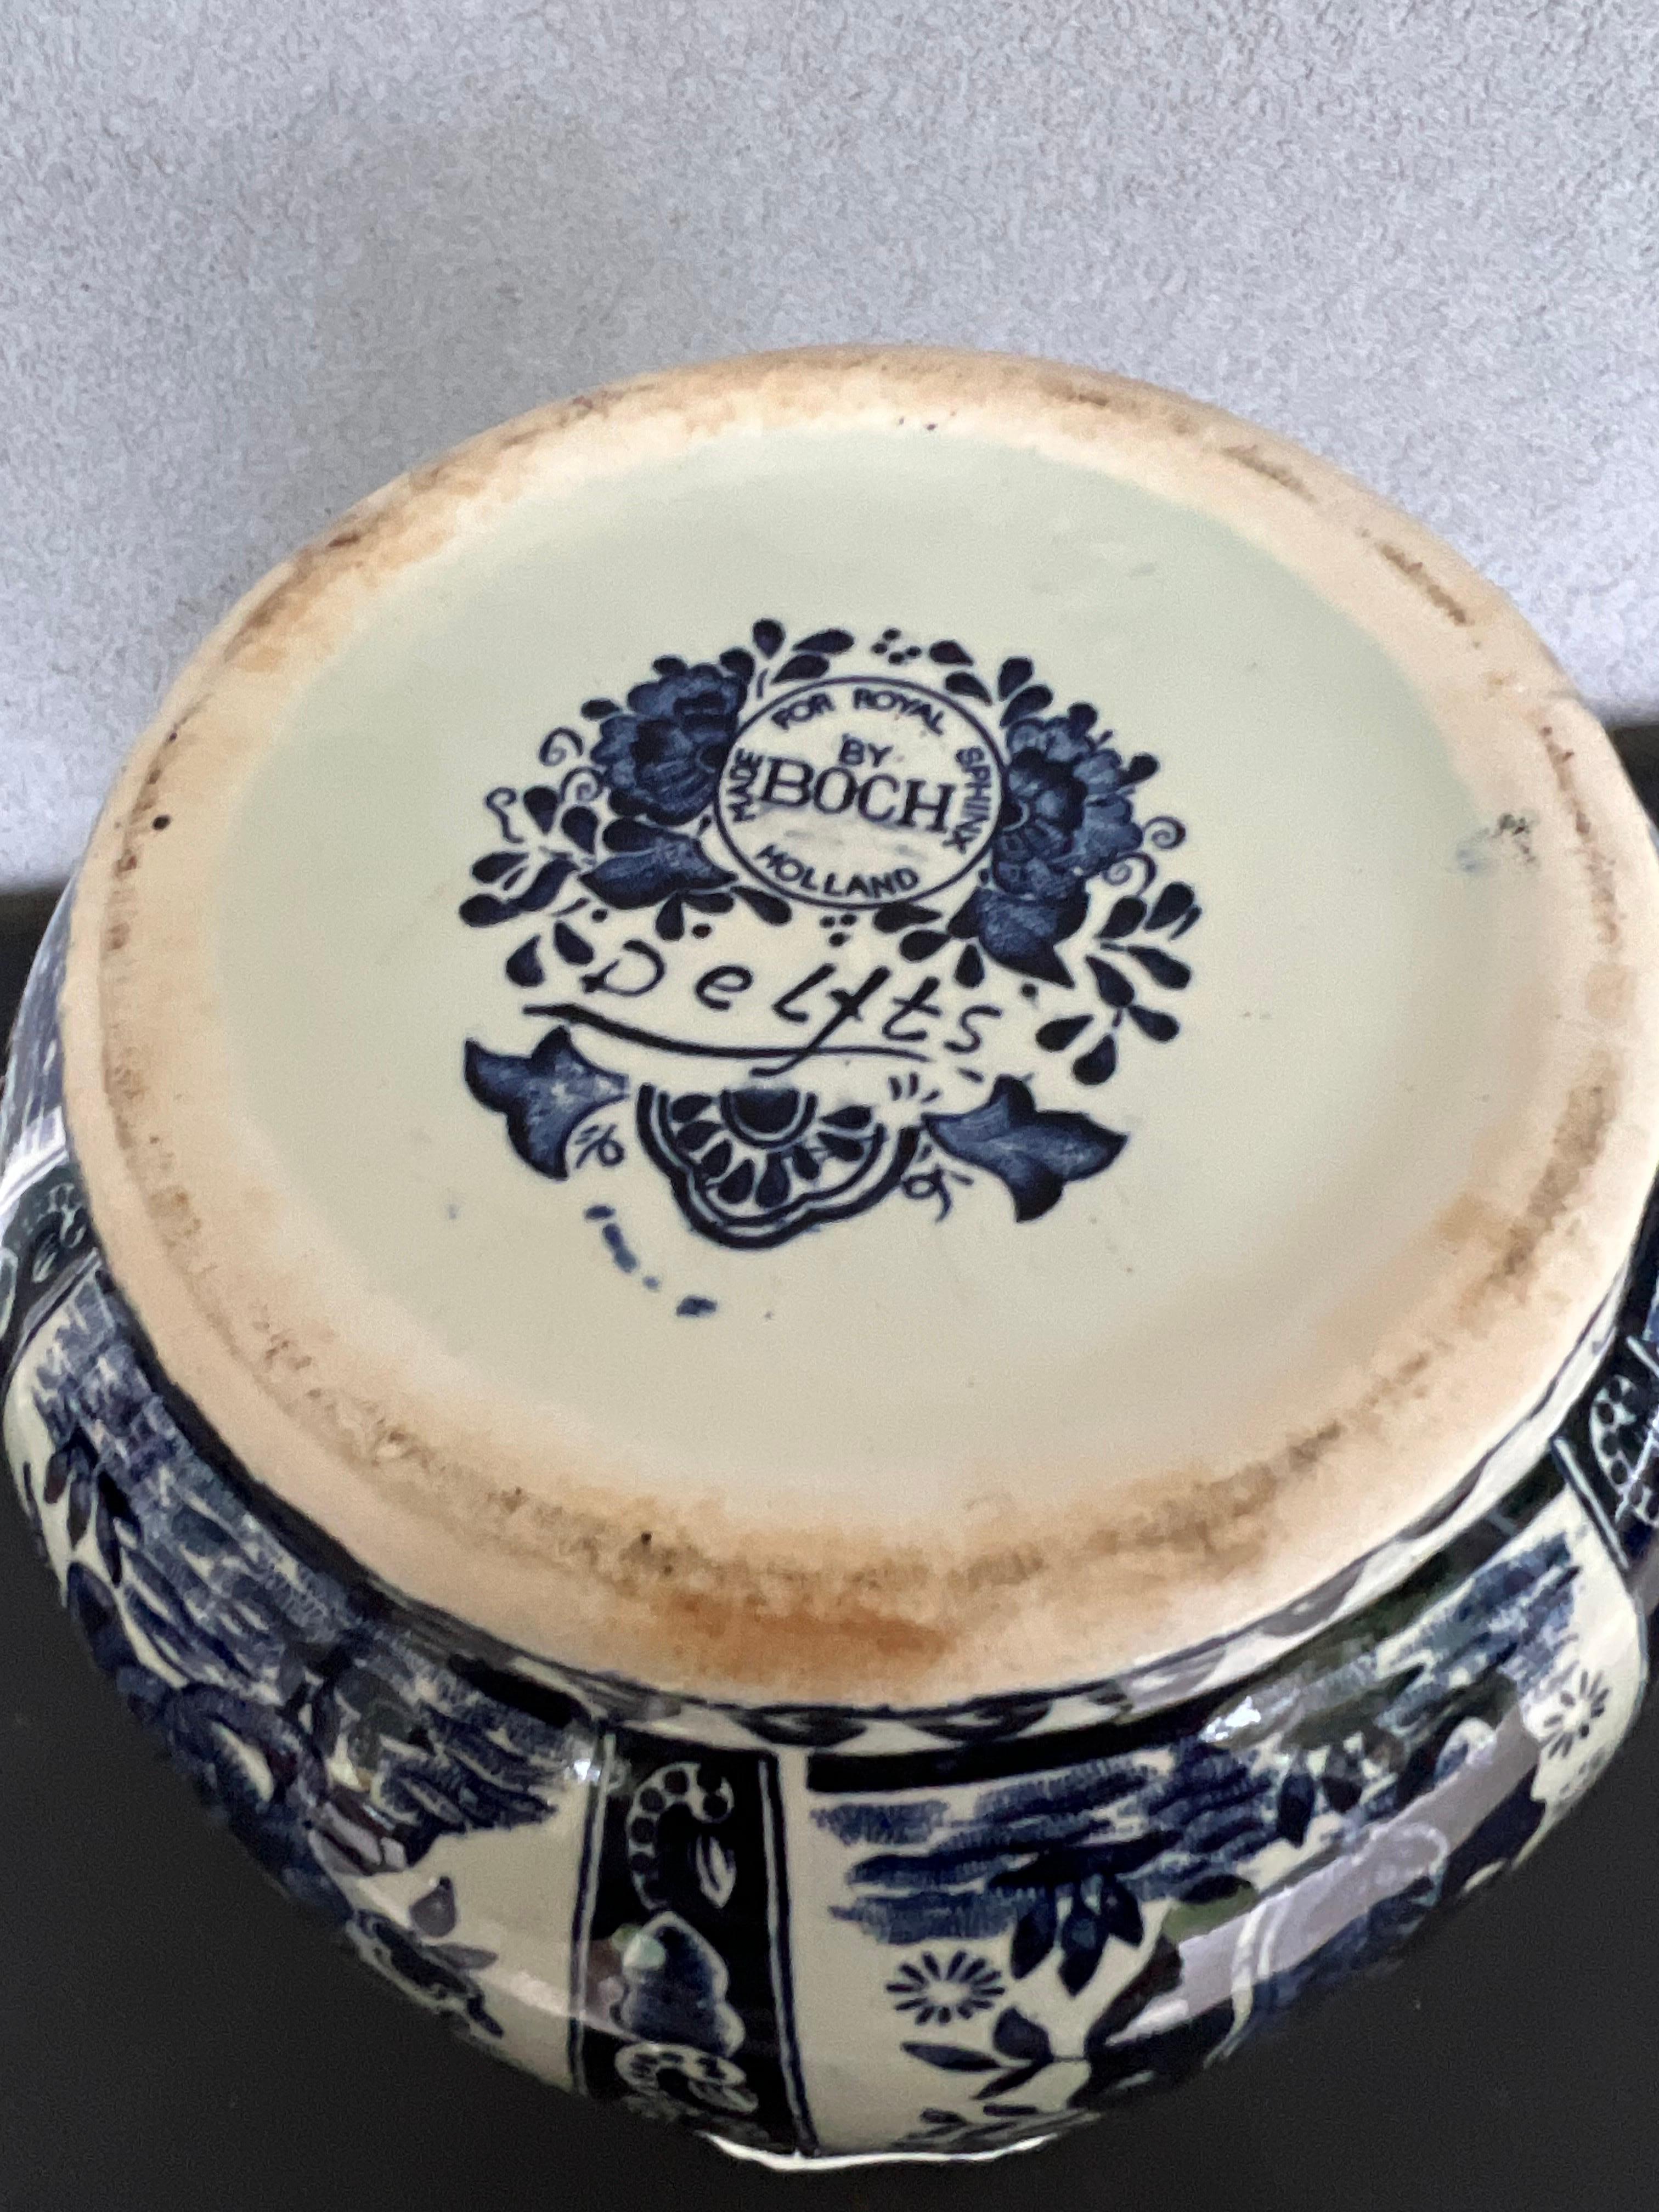 20th Century Vintage Belgium Delft Blue & White Vase by Boch for Royal Sphinx Holland For Sale